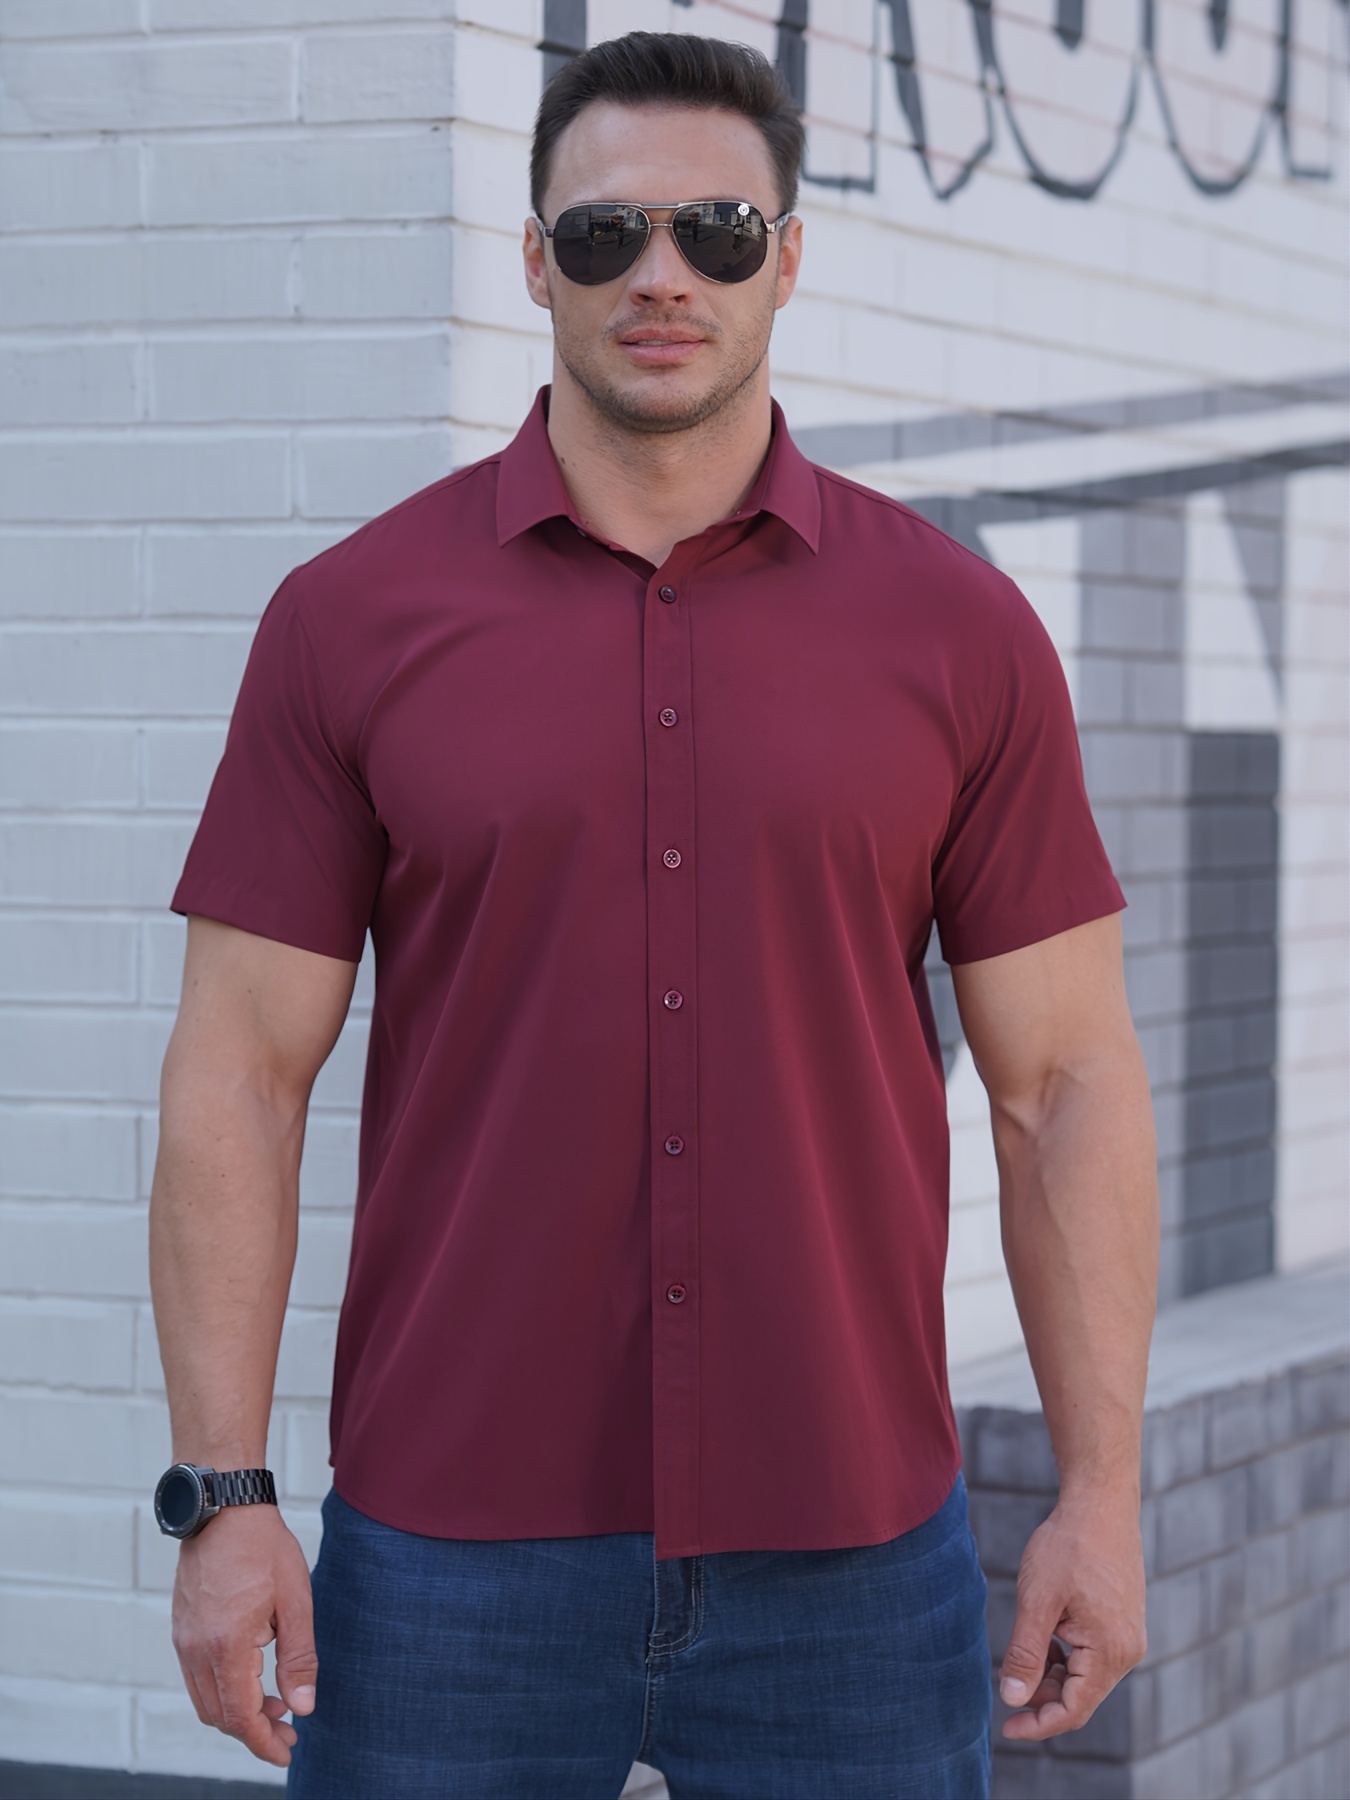 Mens Short Sleeve Solid Dress Shirt Slim Fit Button Down Casual T Shirt  Blouse